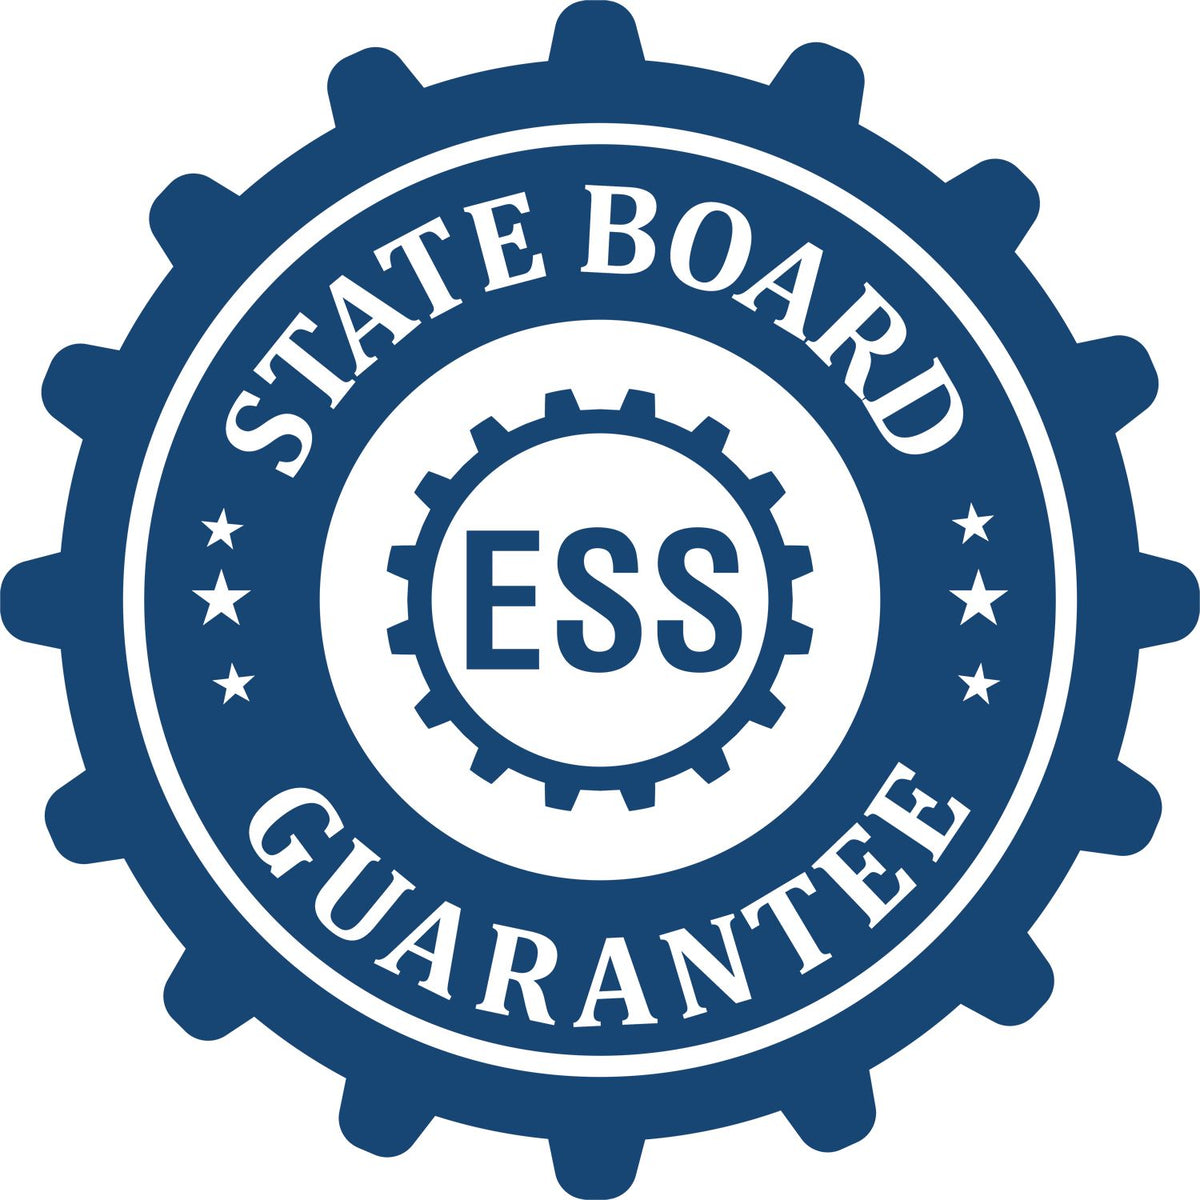 An emblem in a gear shape illustrating a state board guarantee for the State of Missouri Extended Long Reach Geologist Seal